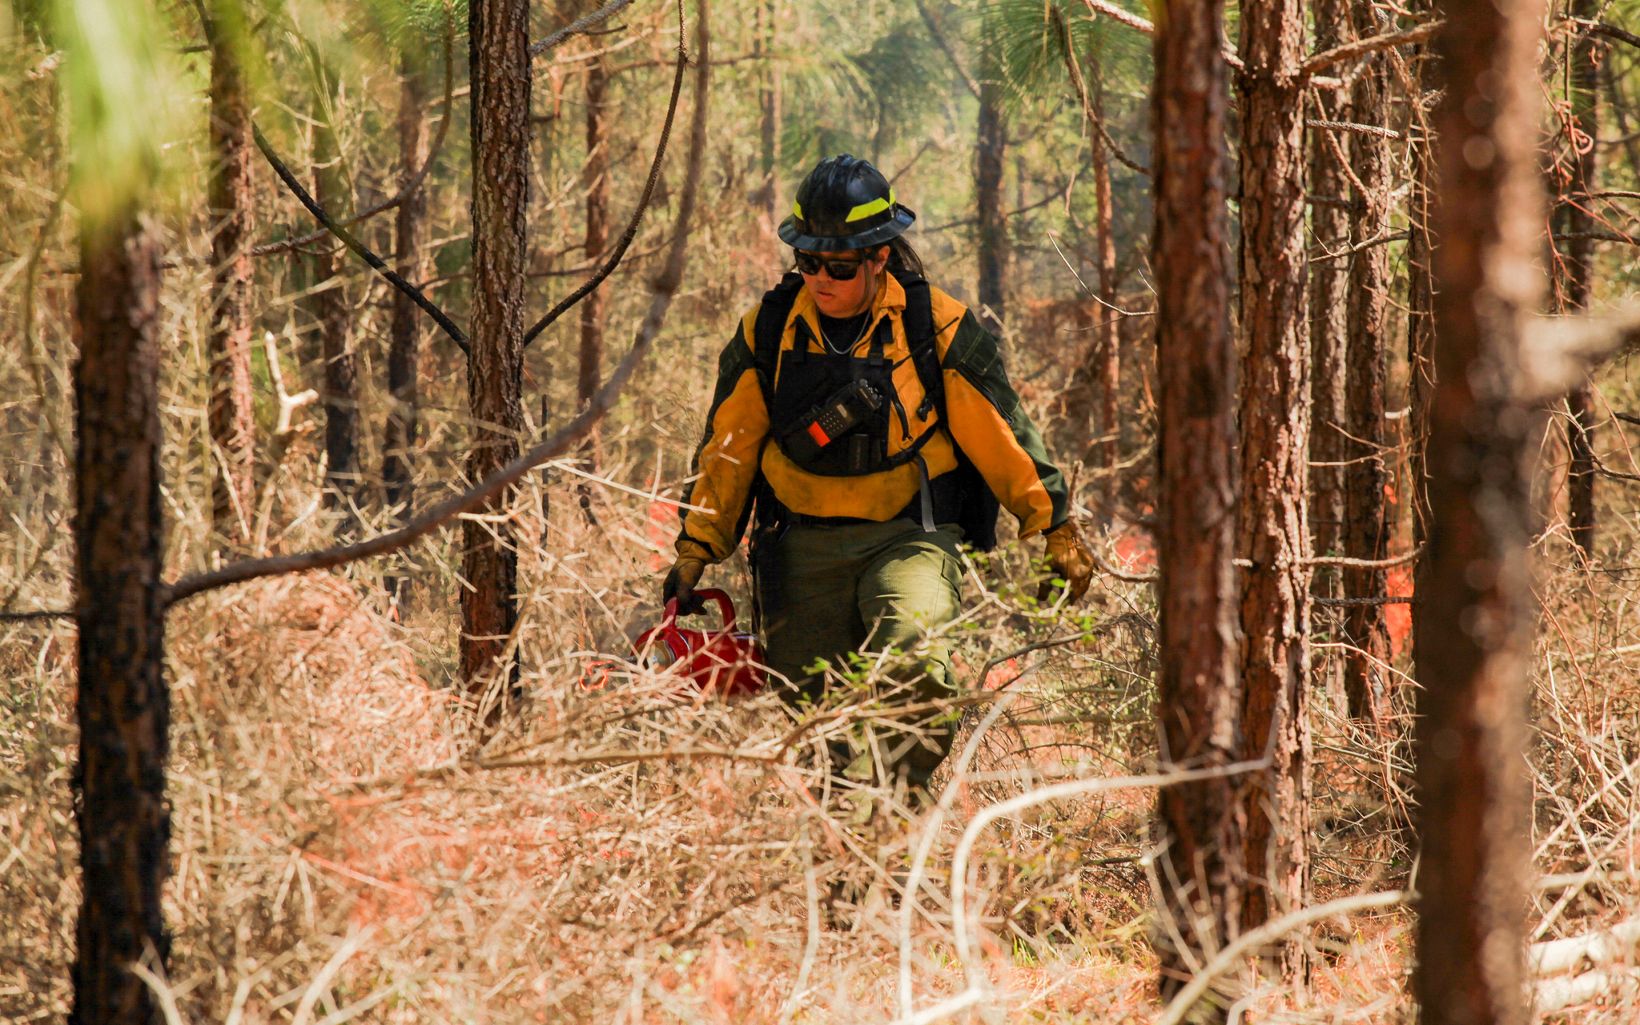 Restoration In Action Charity Battise of the Alabama-Coushatta Tribe of Texas ignites encroaching brush and competing vegetation, creating healthier conditions for the longleafs to grow. © Claire Everett/TNC